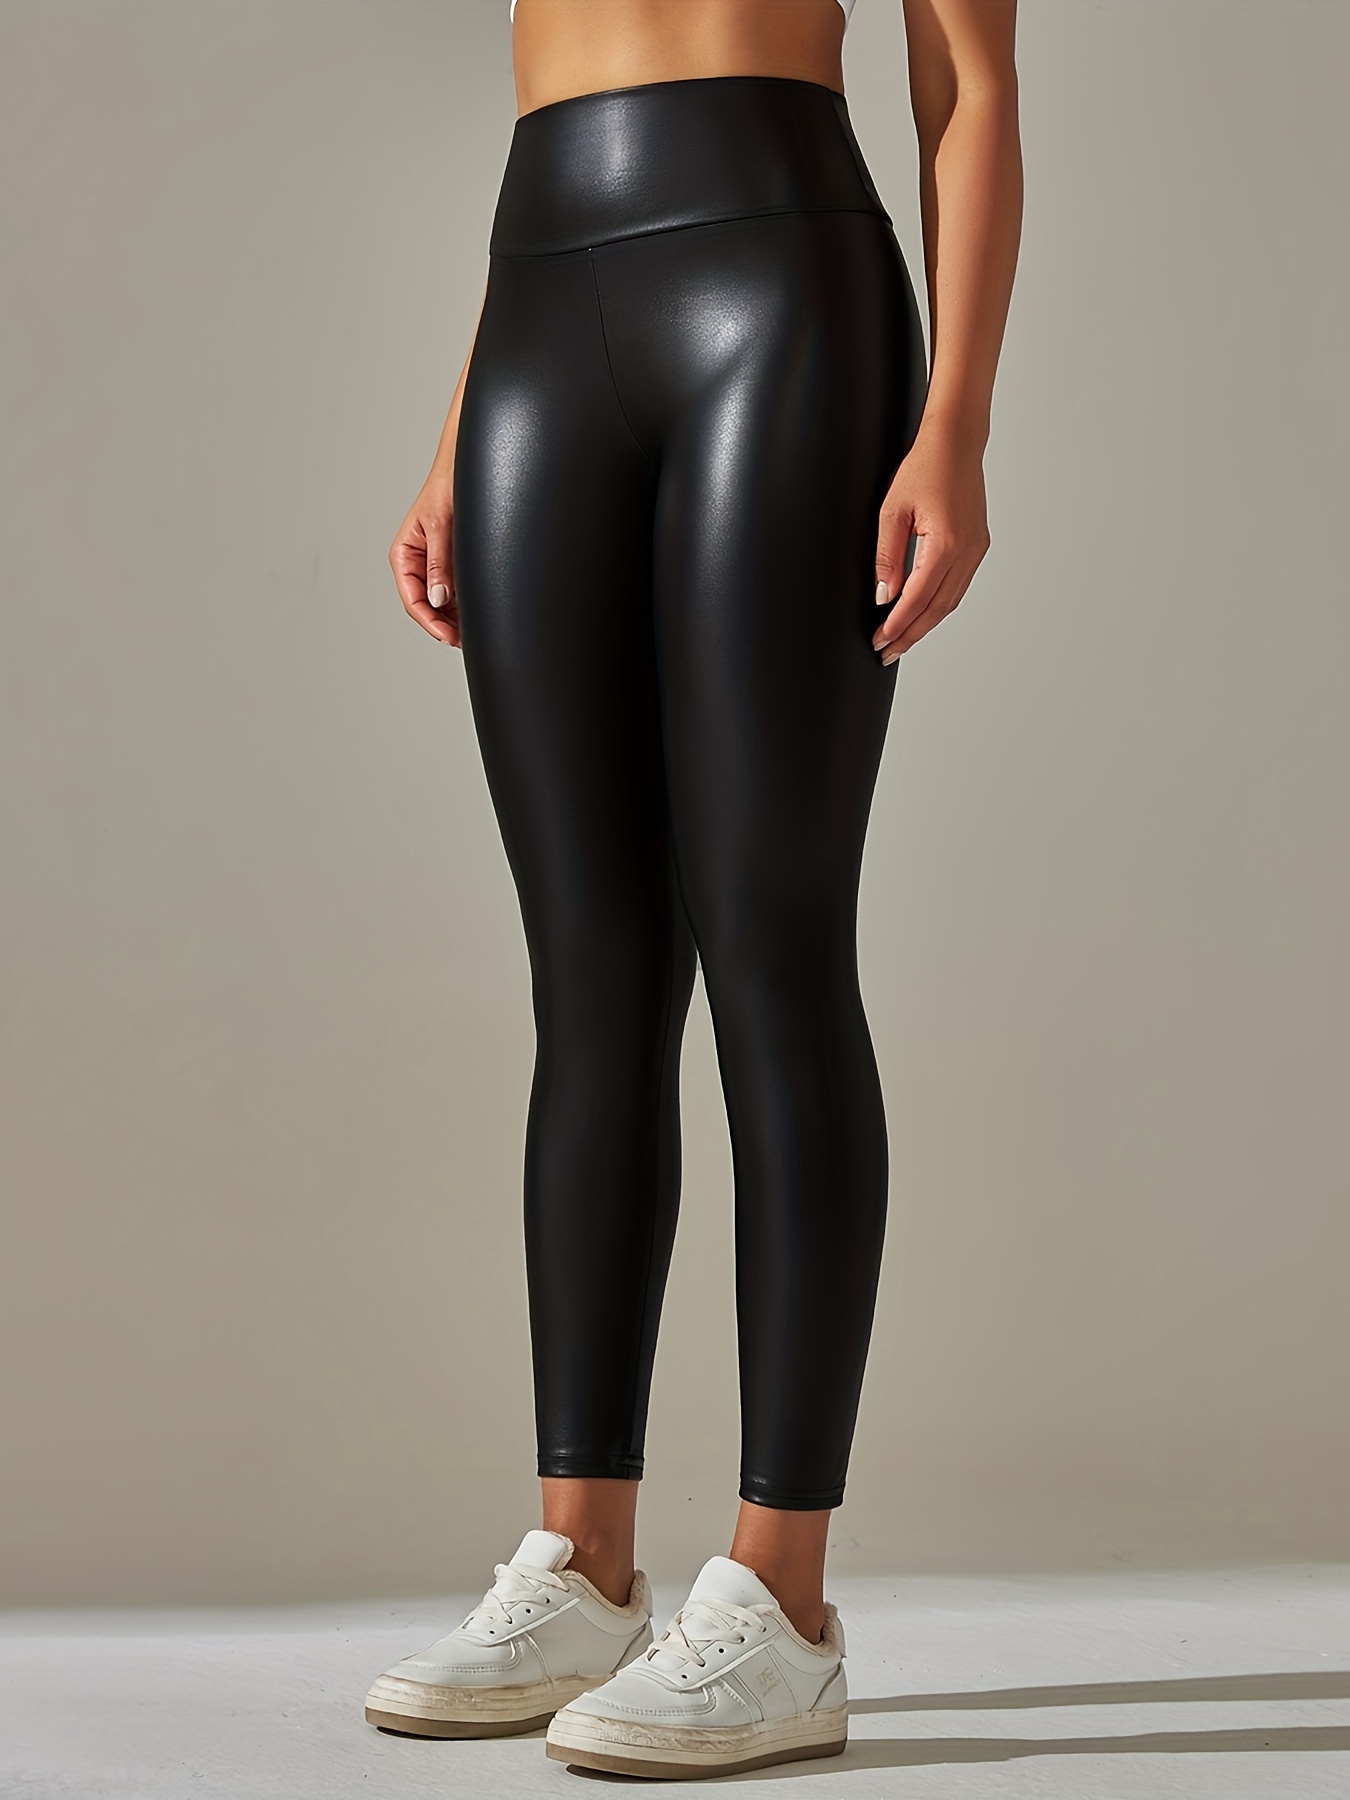 Women Black Leather Pants/ High Waisted Leather Leggings for Women/ Black  Leggings for Women -  Canada